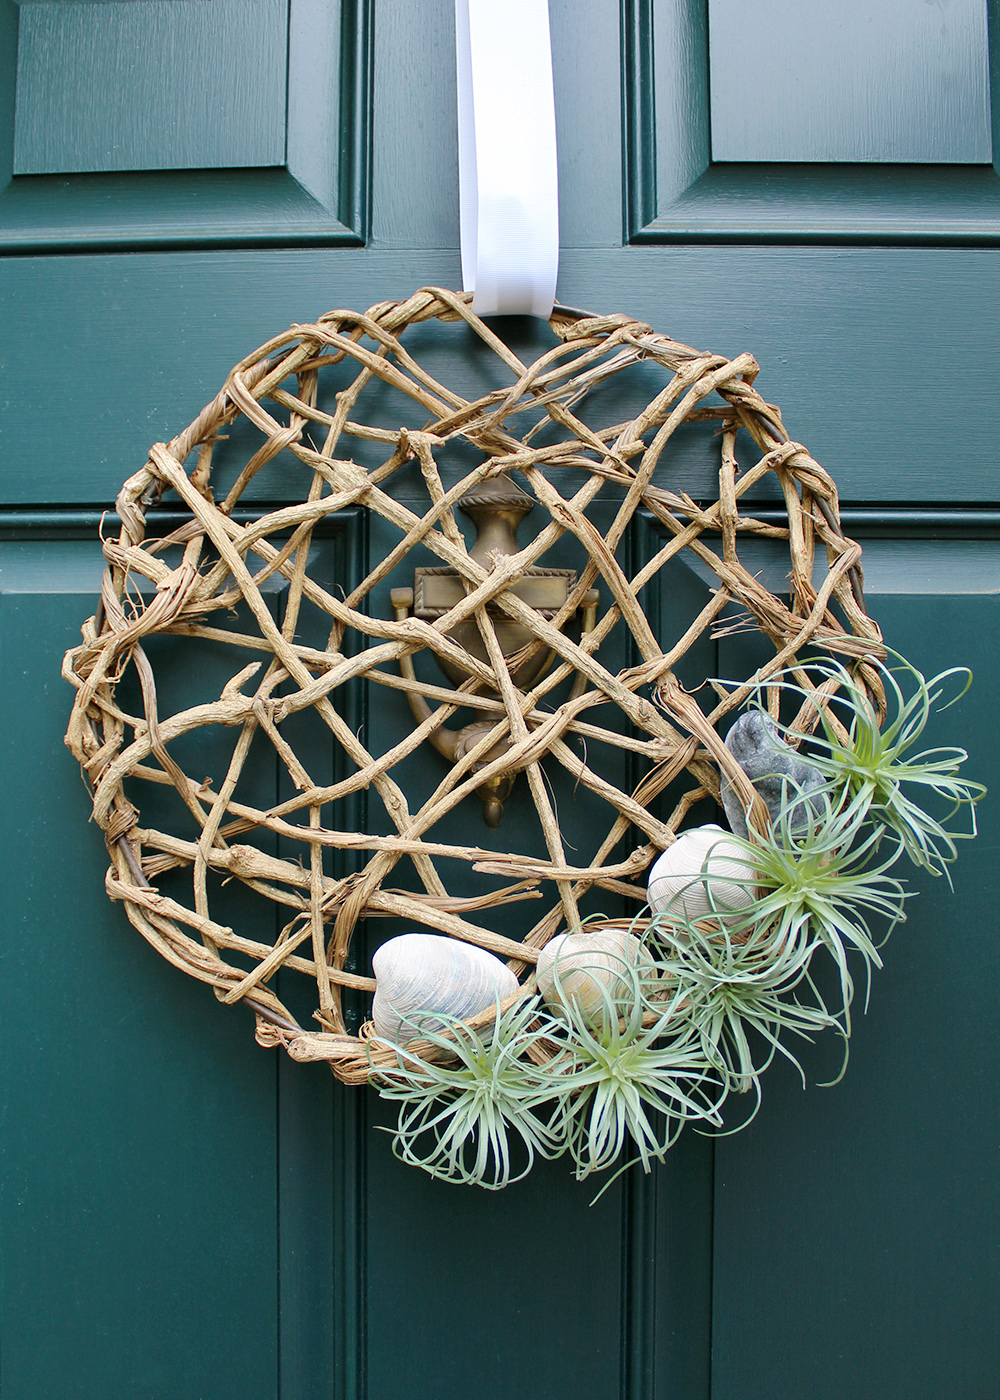 Make This Air Plant Wreath with Seashells